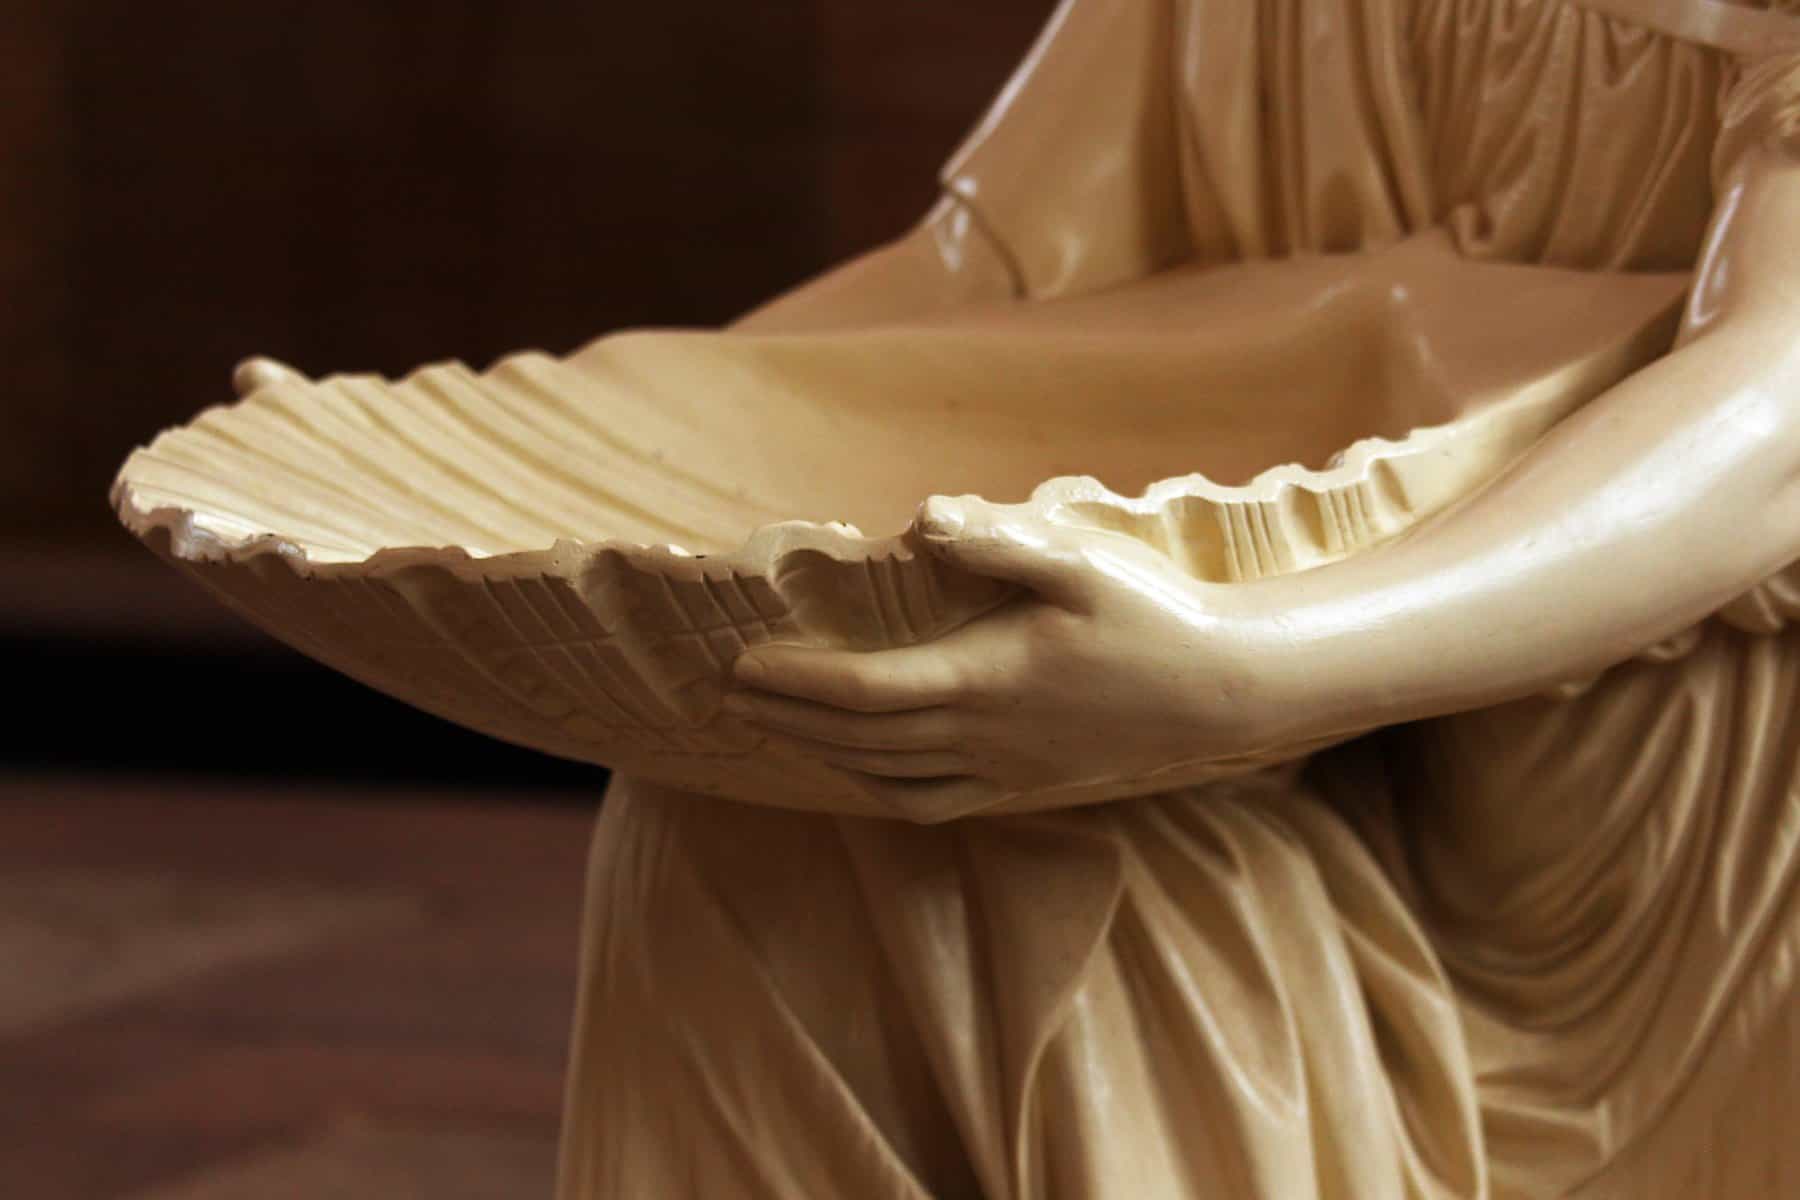 A statue's arms are shown holding a shell shaped bowl for holy water.